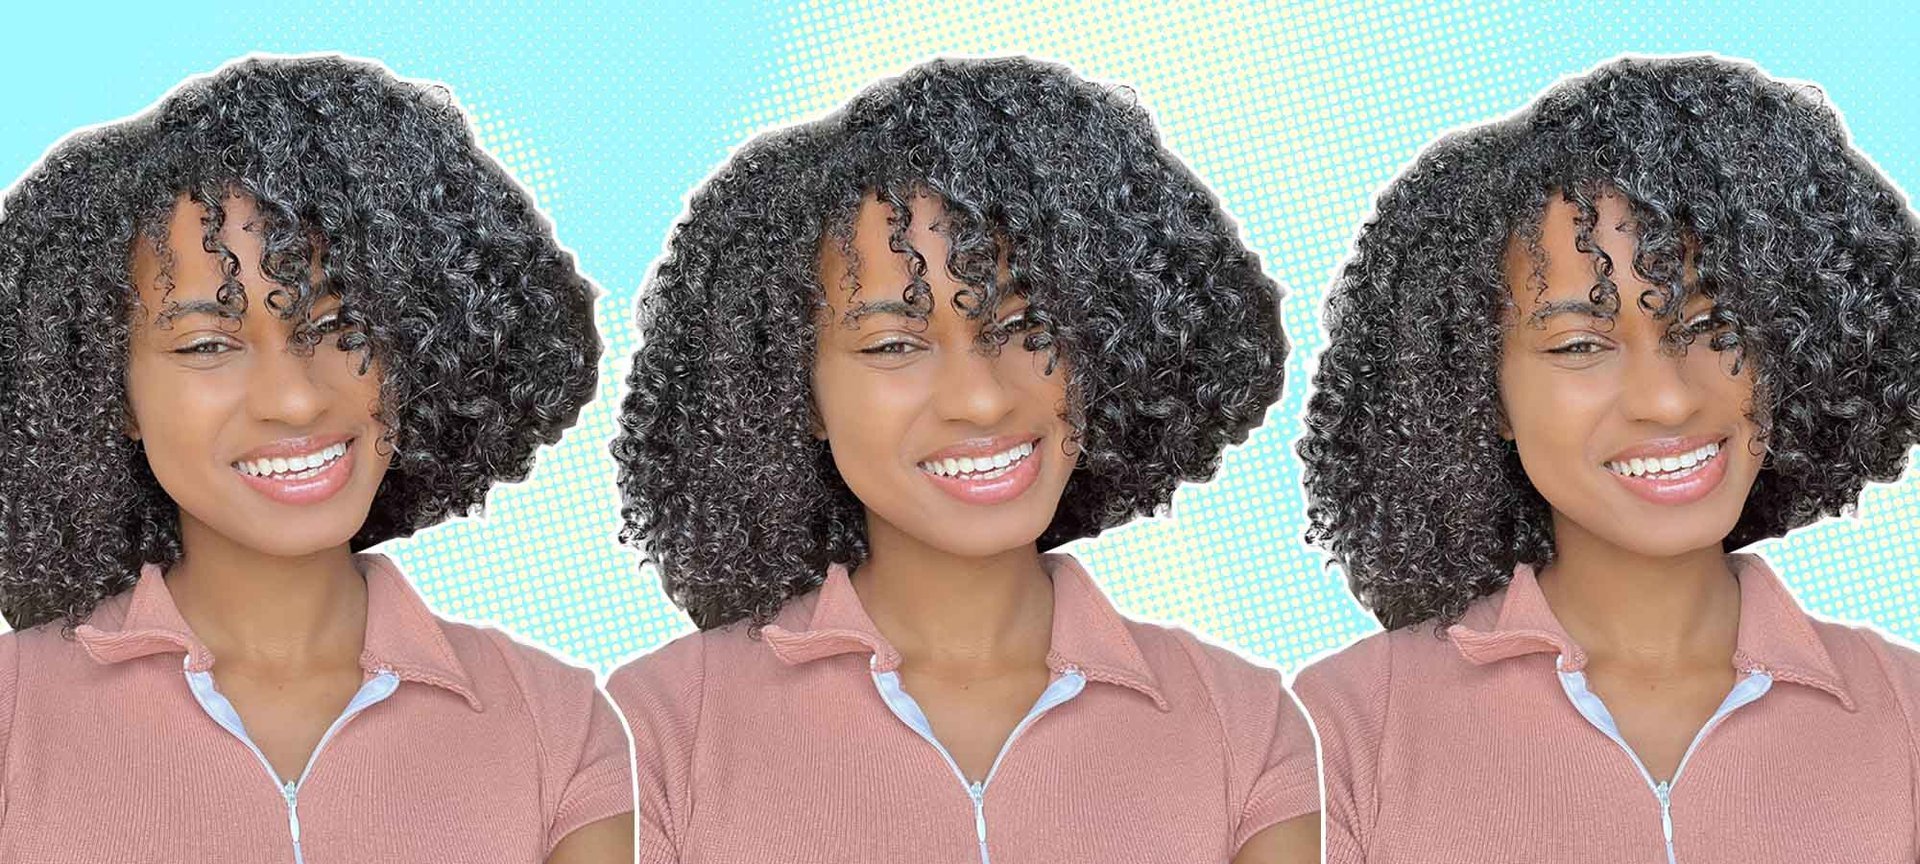 https://www.lorealparisusa.com/-/media/project/loreal/brand-sites/oap/americas/us/beauty-magazine/2022/october/10-17/how-to-detangle-curly-hair/how-to-detangle-curly-hair.jpg